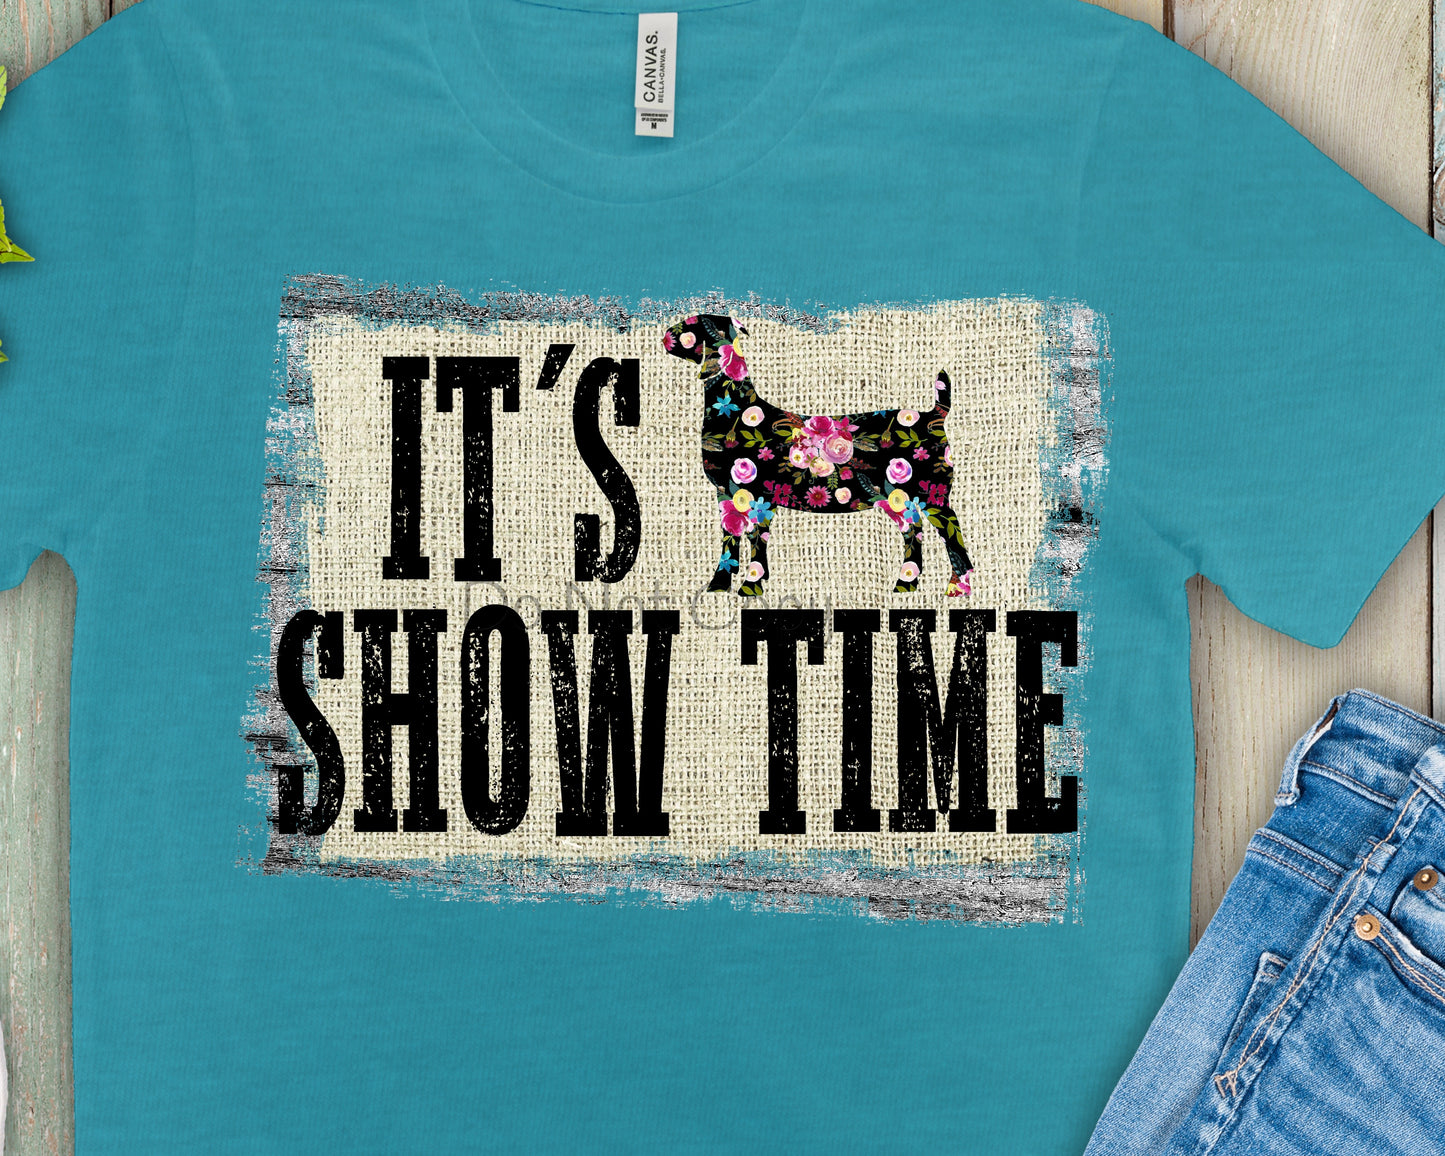 It’s show time goat-DTF